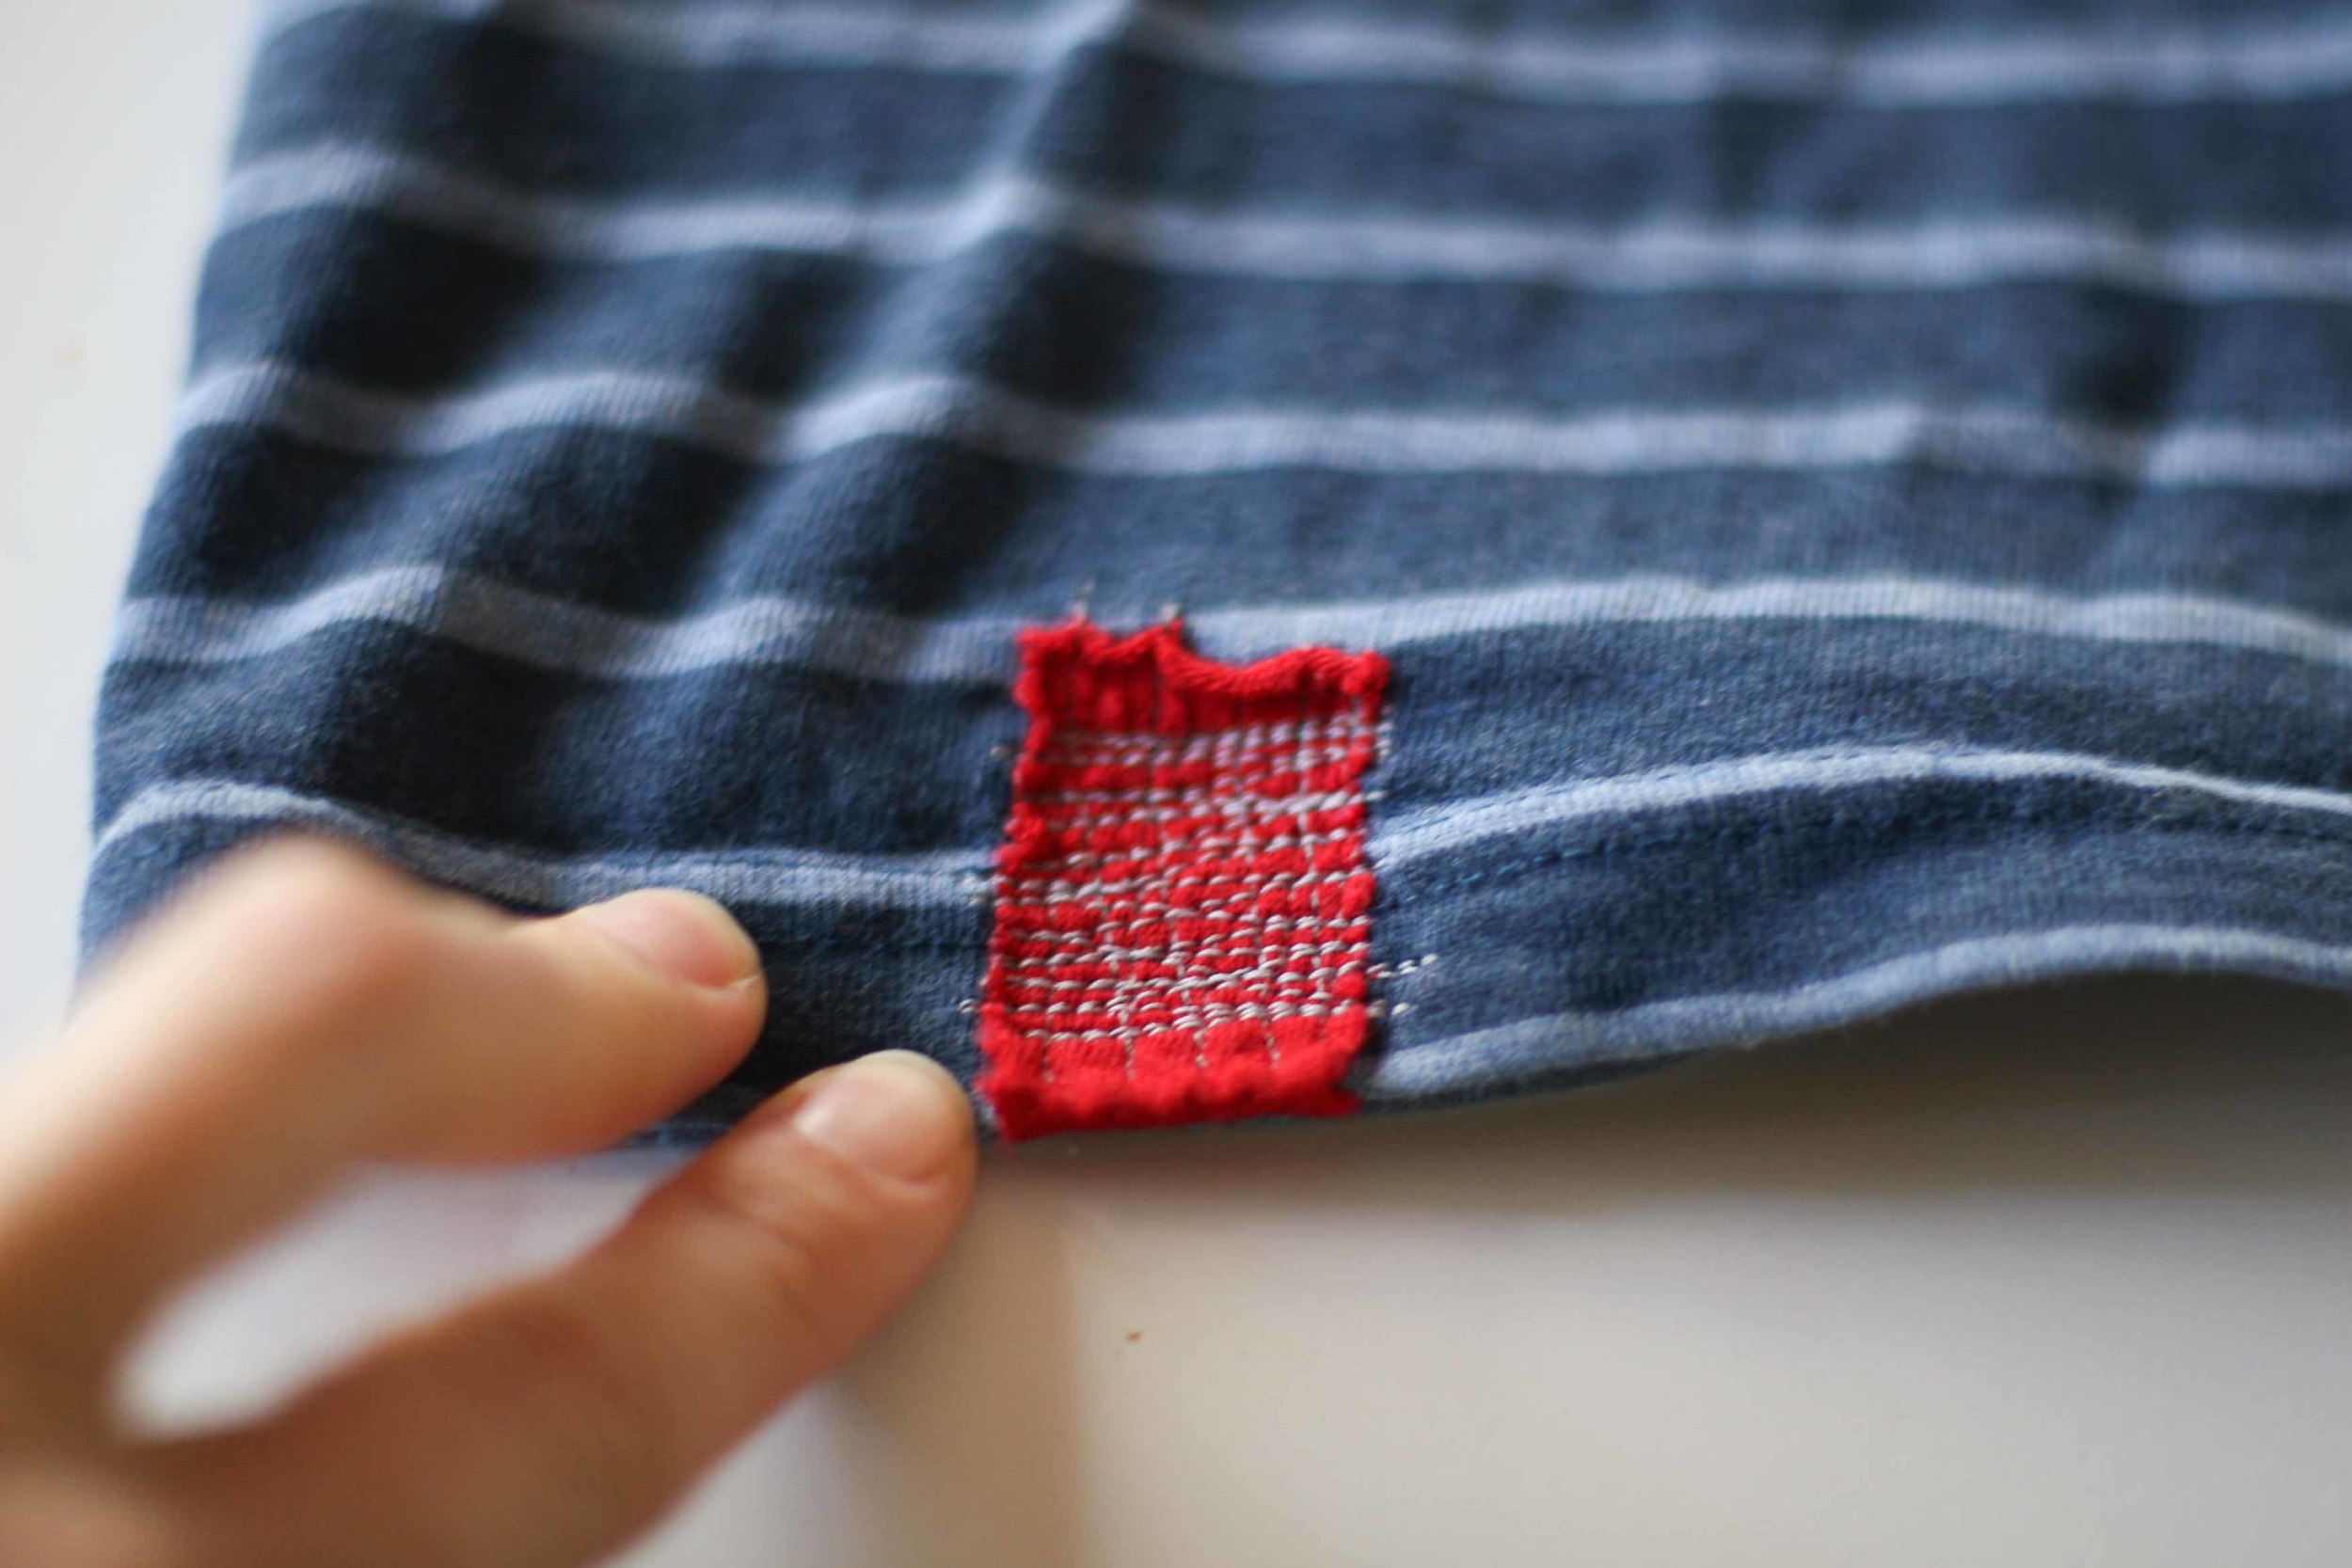 The simple visible mending with slow stitching 